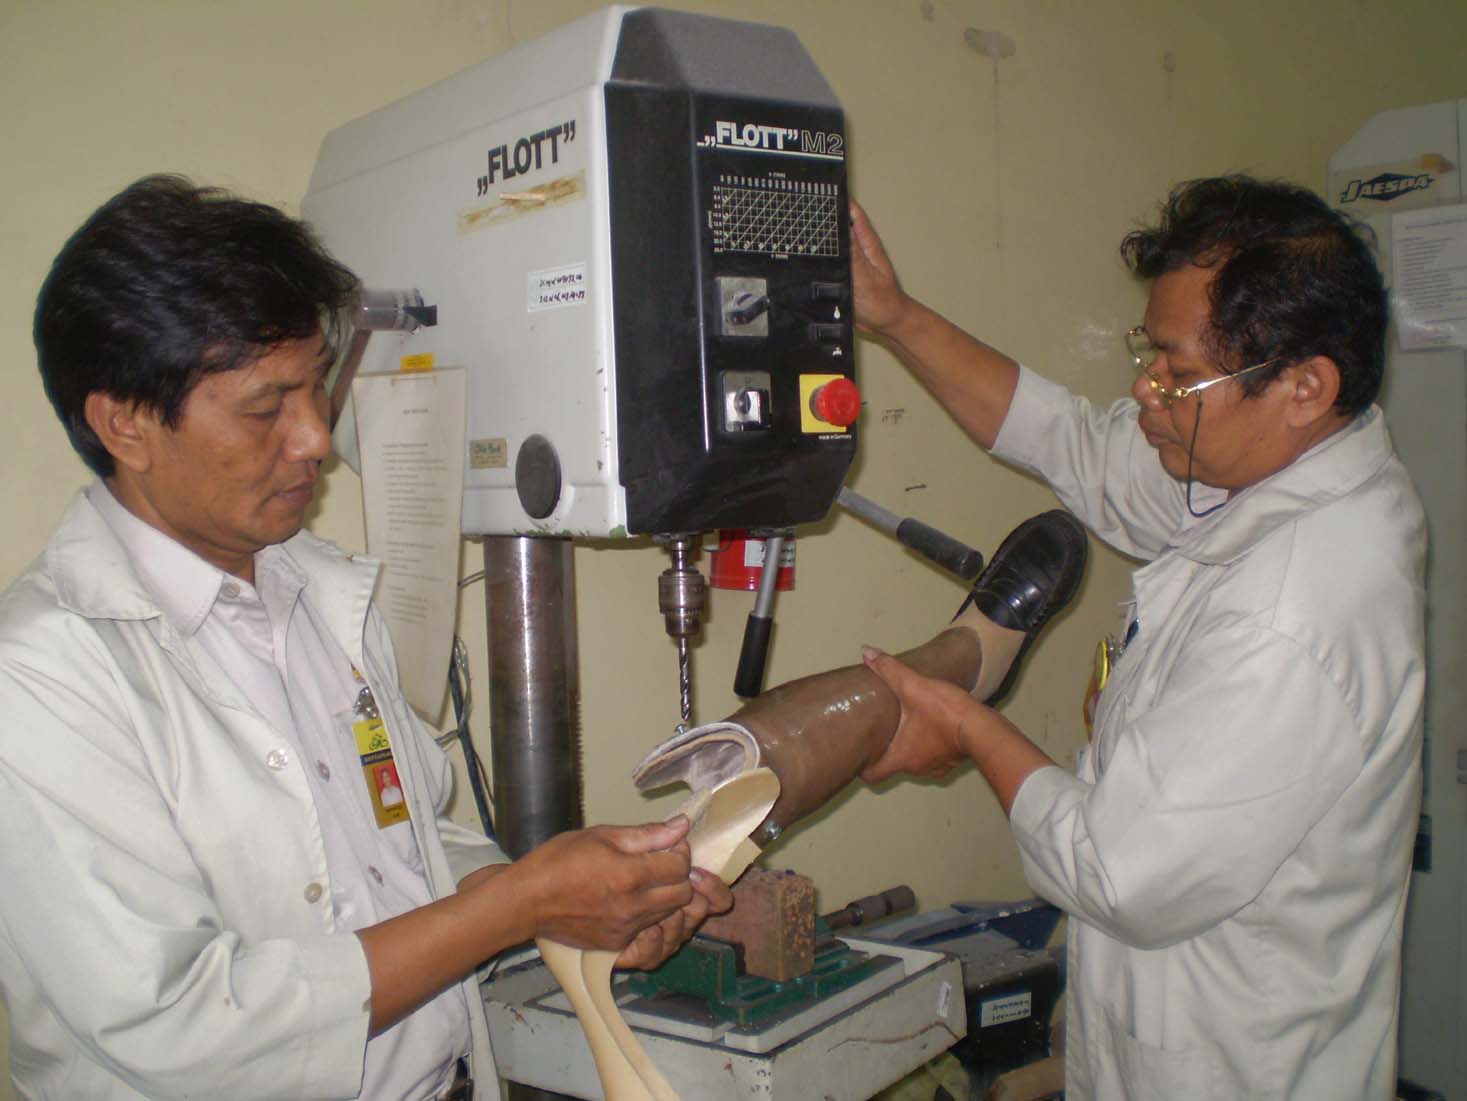 [PROSTHETIST+AND+ORTHOTIST+BEBENG+AND+SUMEDI+ARE+WORKING+ON+A+PROSTHESIS.jpg]